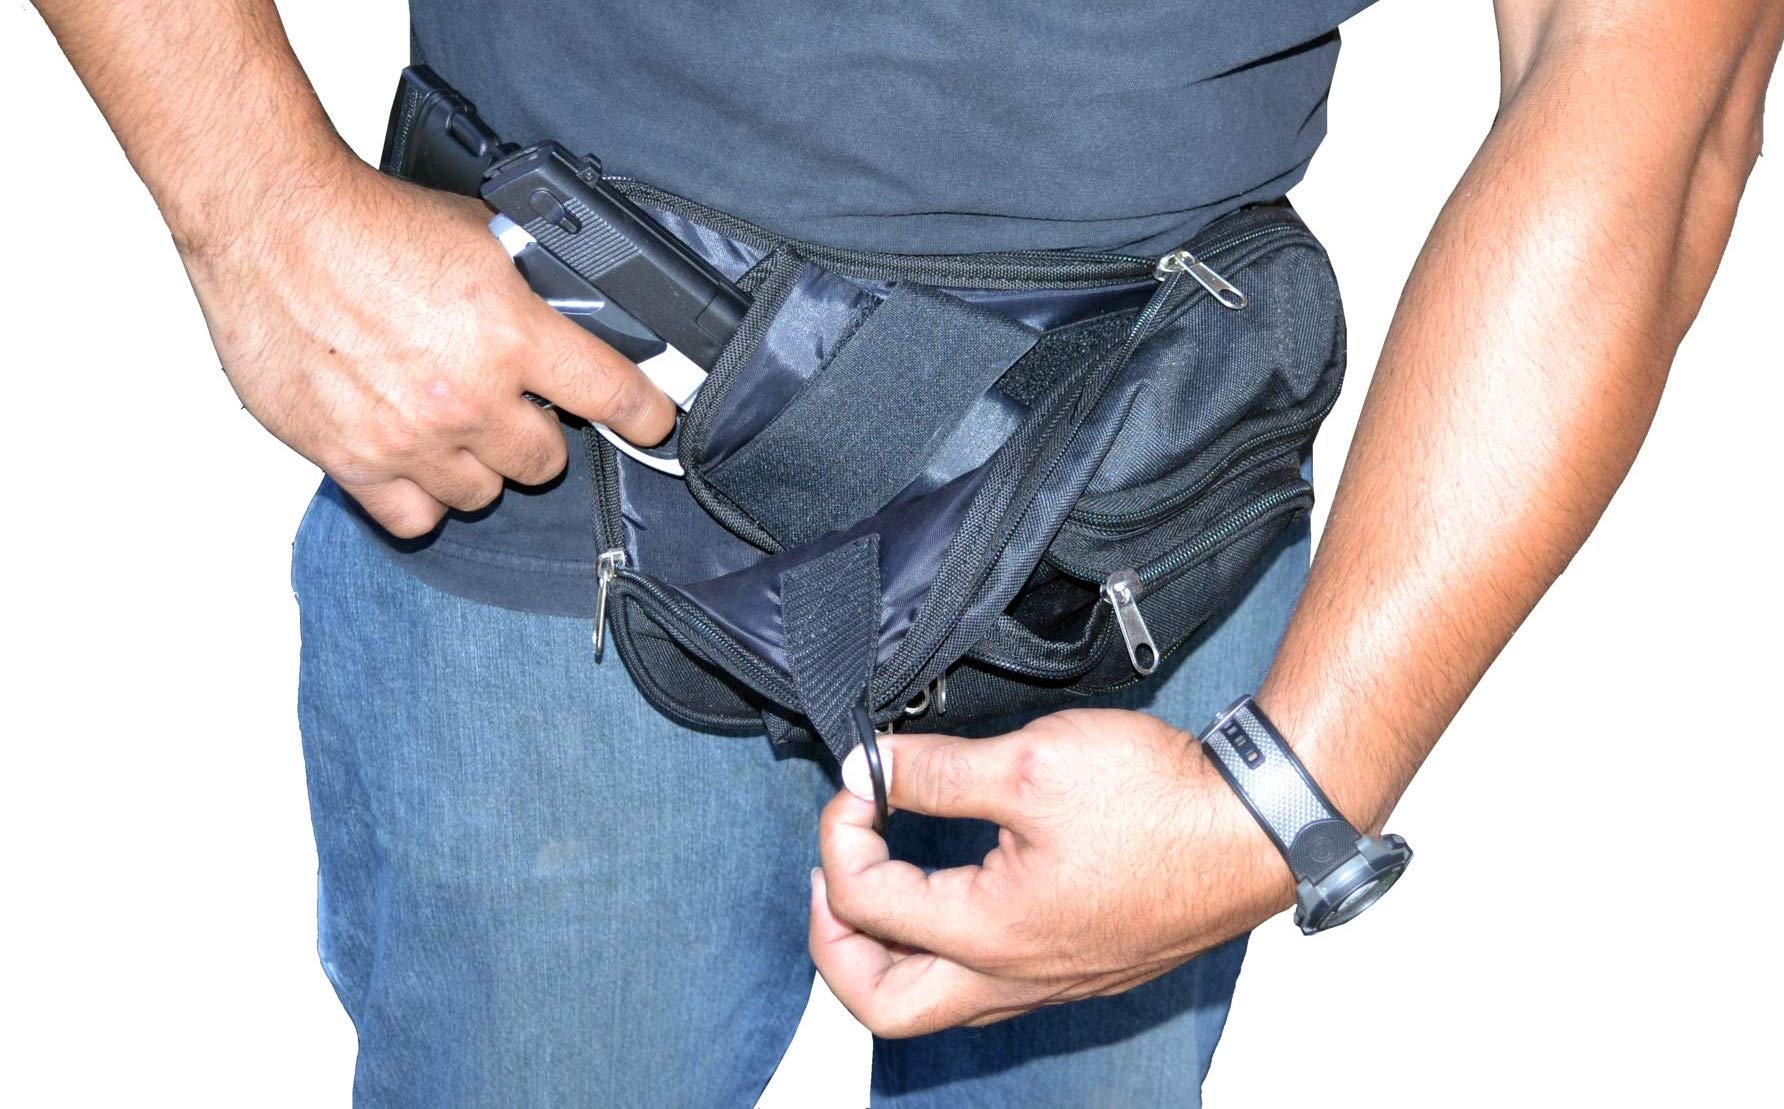 Top Concealed Carry Fanny Packs – Hands Free Concealment